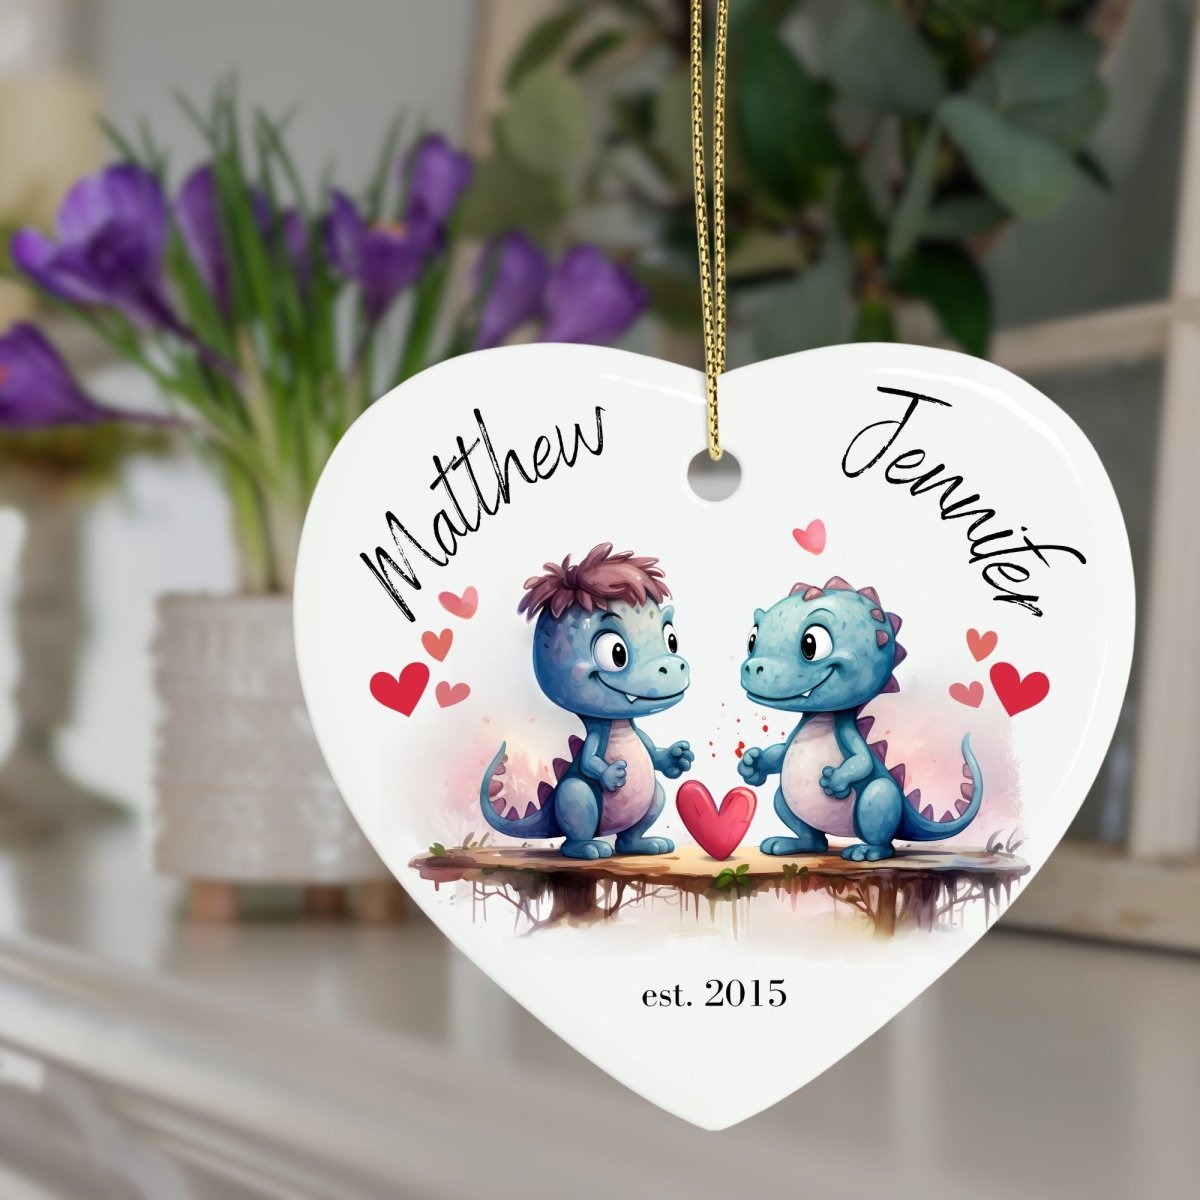 Cute personalised Dinosaur Couple Ornament Ceramic Heart Ornament Lovers Keepsake Valentines Day Gift Anniversary Gift Idea for Soulmates - Everything Pixel